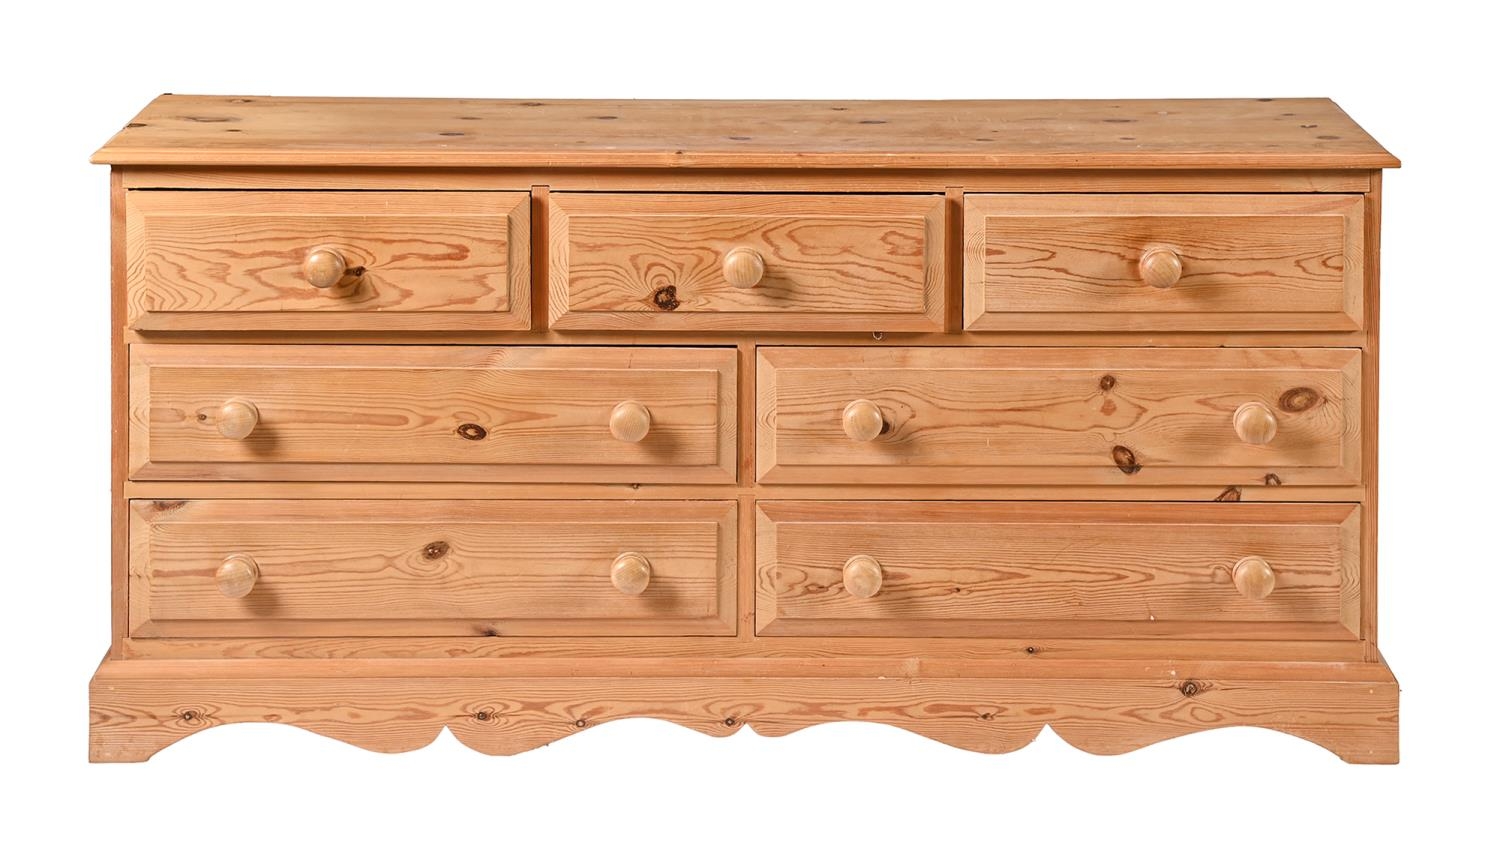 A waxed pine chest of drawers, 75cm h; 152 x 45cm